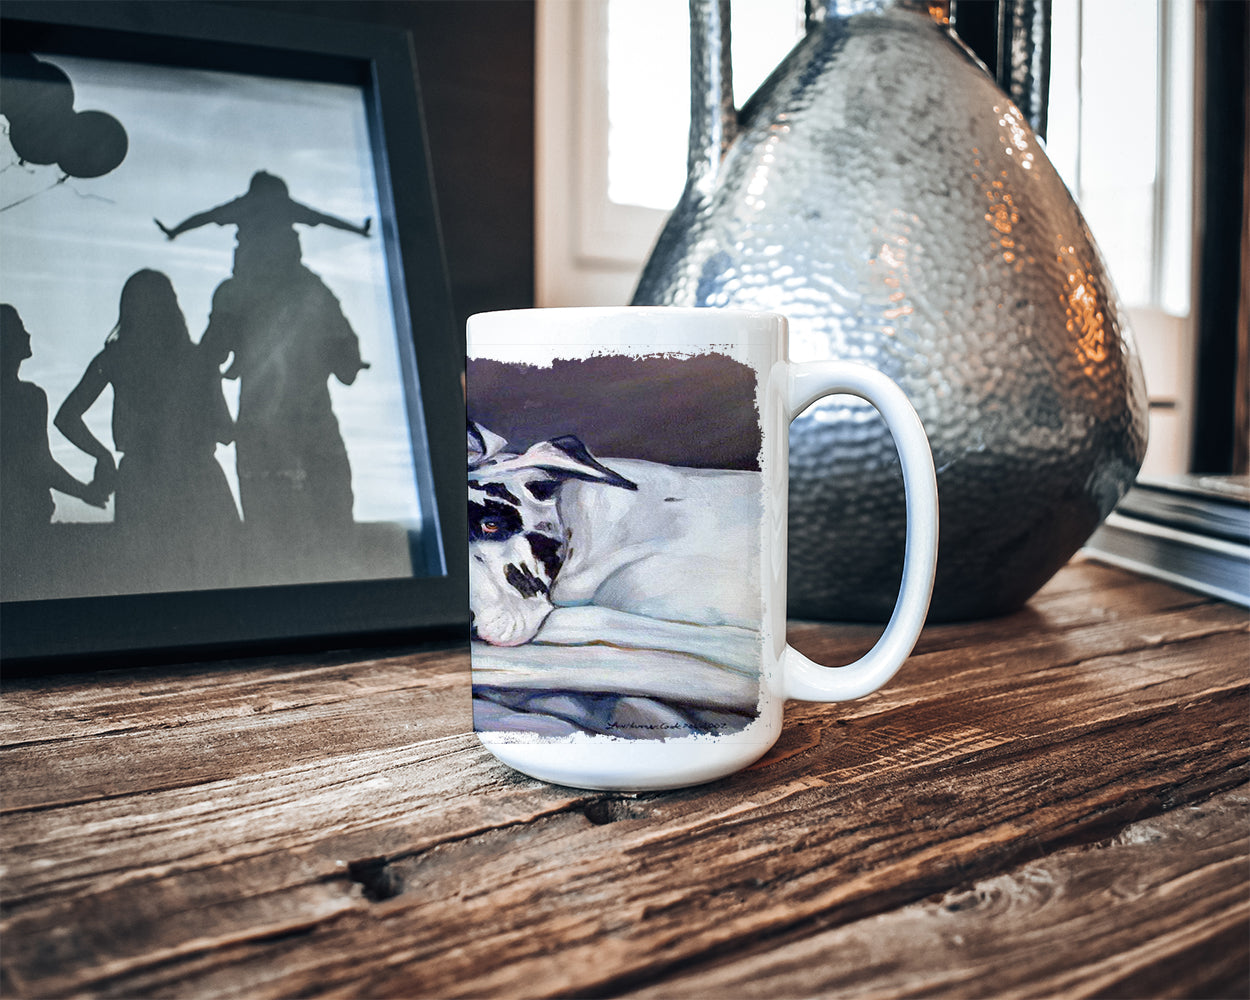 Harlequin Natural Great Danes Dishwasher Safe Microwavable Ceramic Coffee Mug 15 ounce 7163CM15  the-store.com.